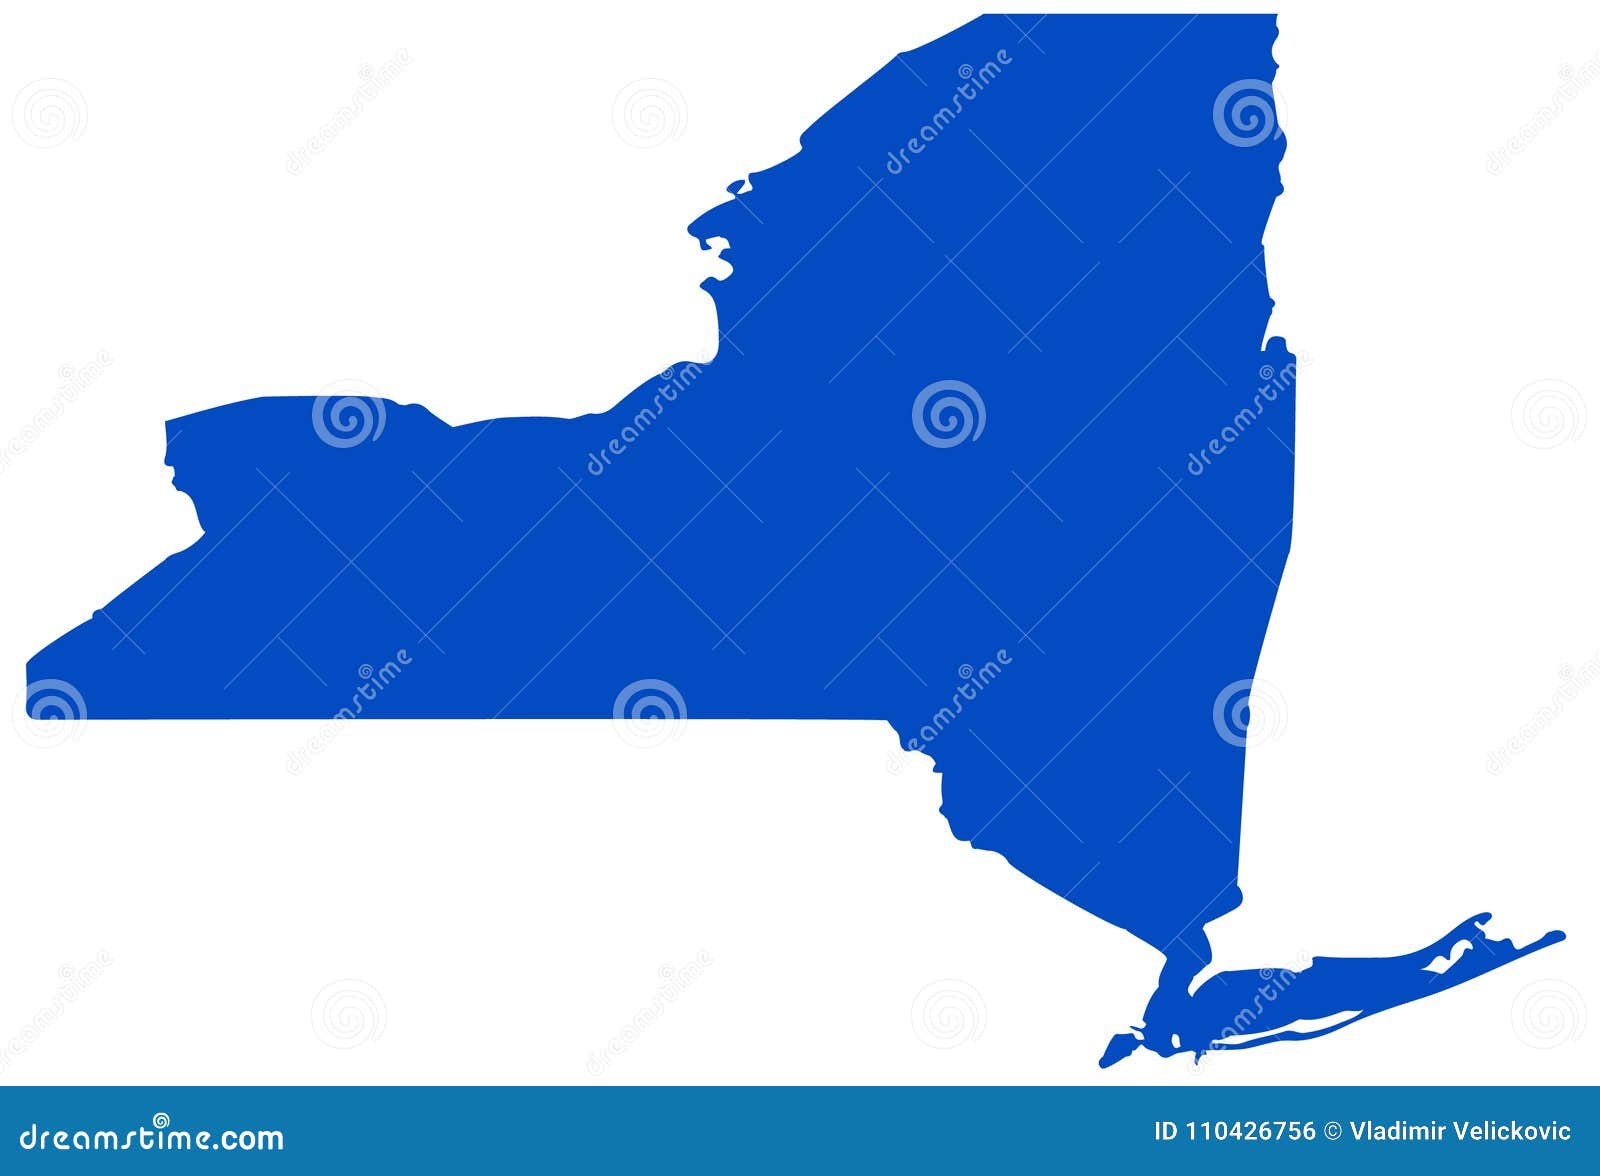 New York State Map State In The Northeastern United States Stock